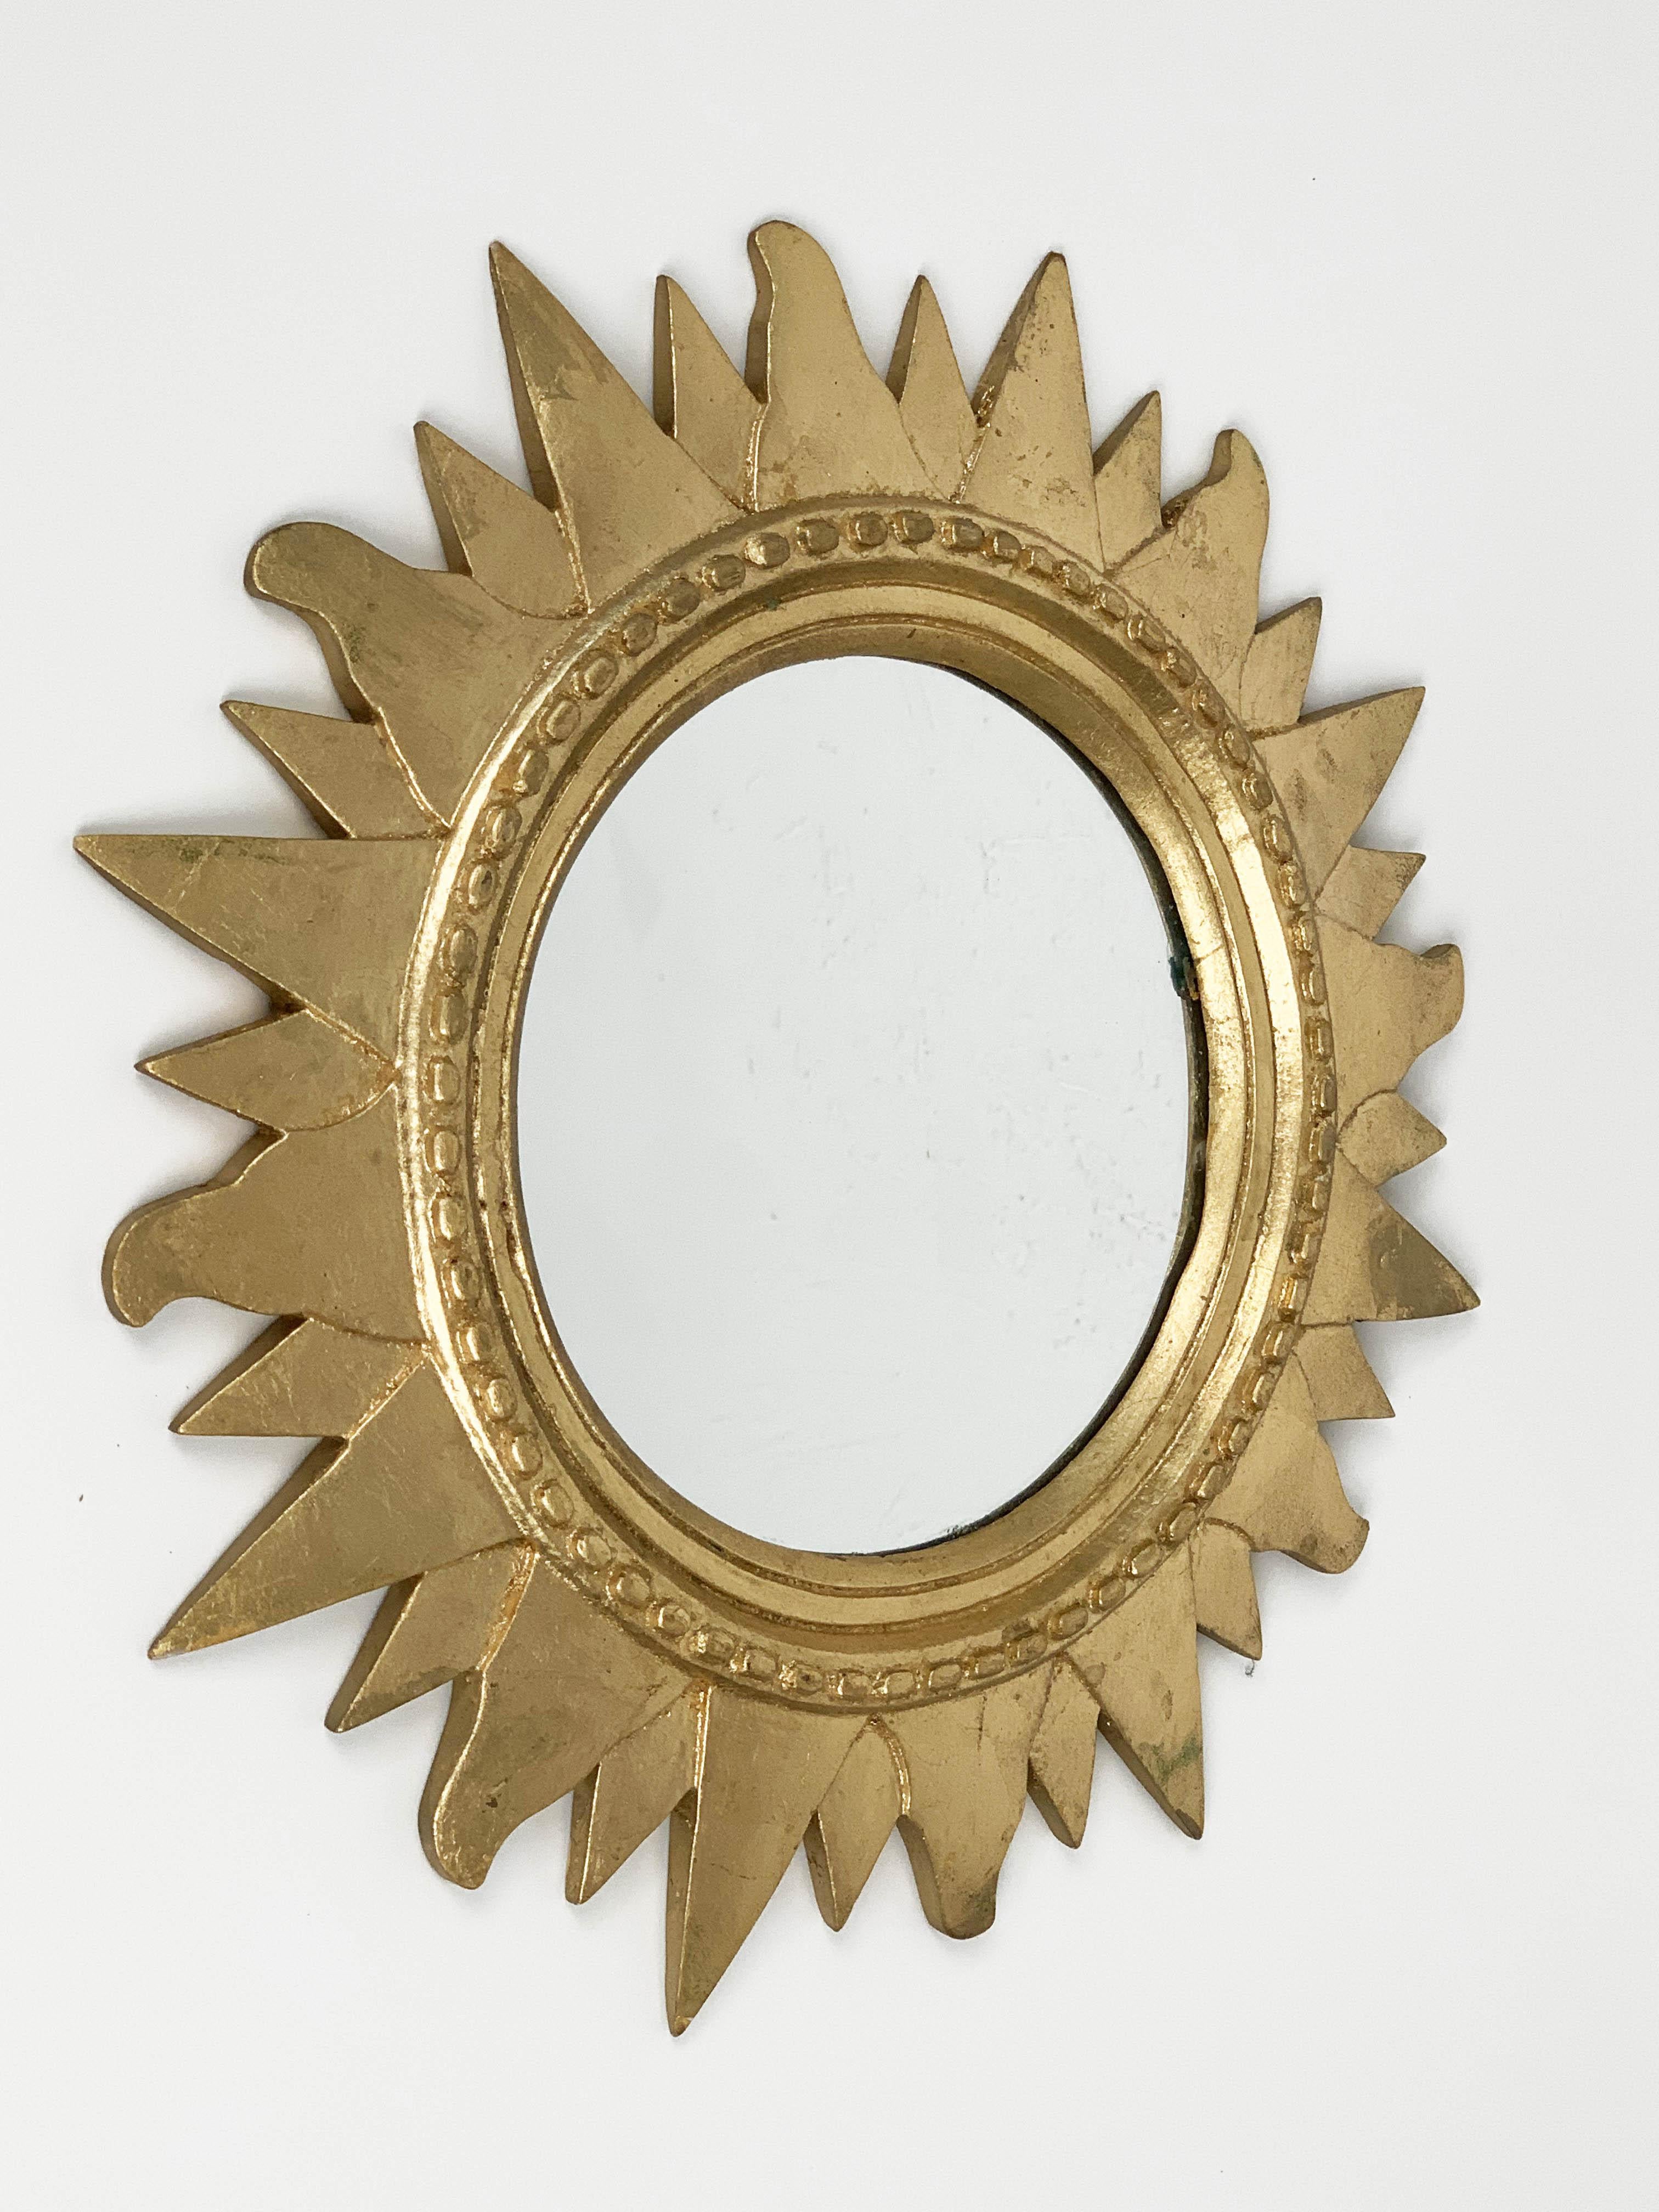 Italian gilded plastic sunburst mirror, produced during 1970s. 

It is a round wall mirror made of gold-plated styrofoam, in amazing conditions and with a delicate and nice patina.

The item is great for completing a colored midcentury